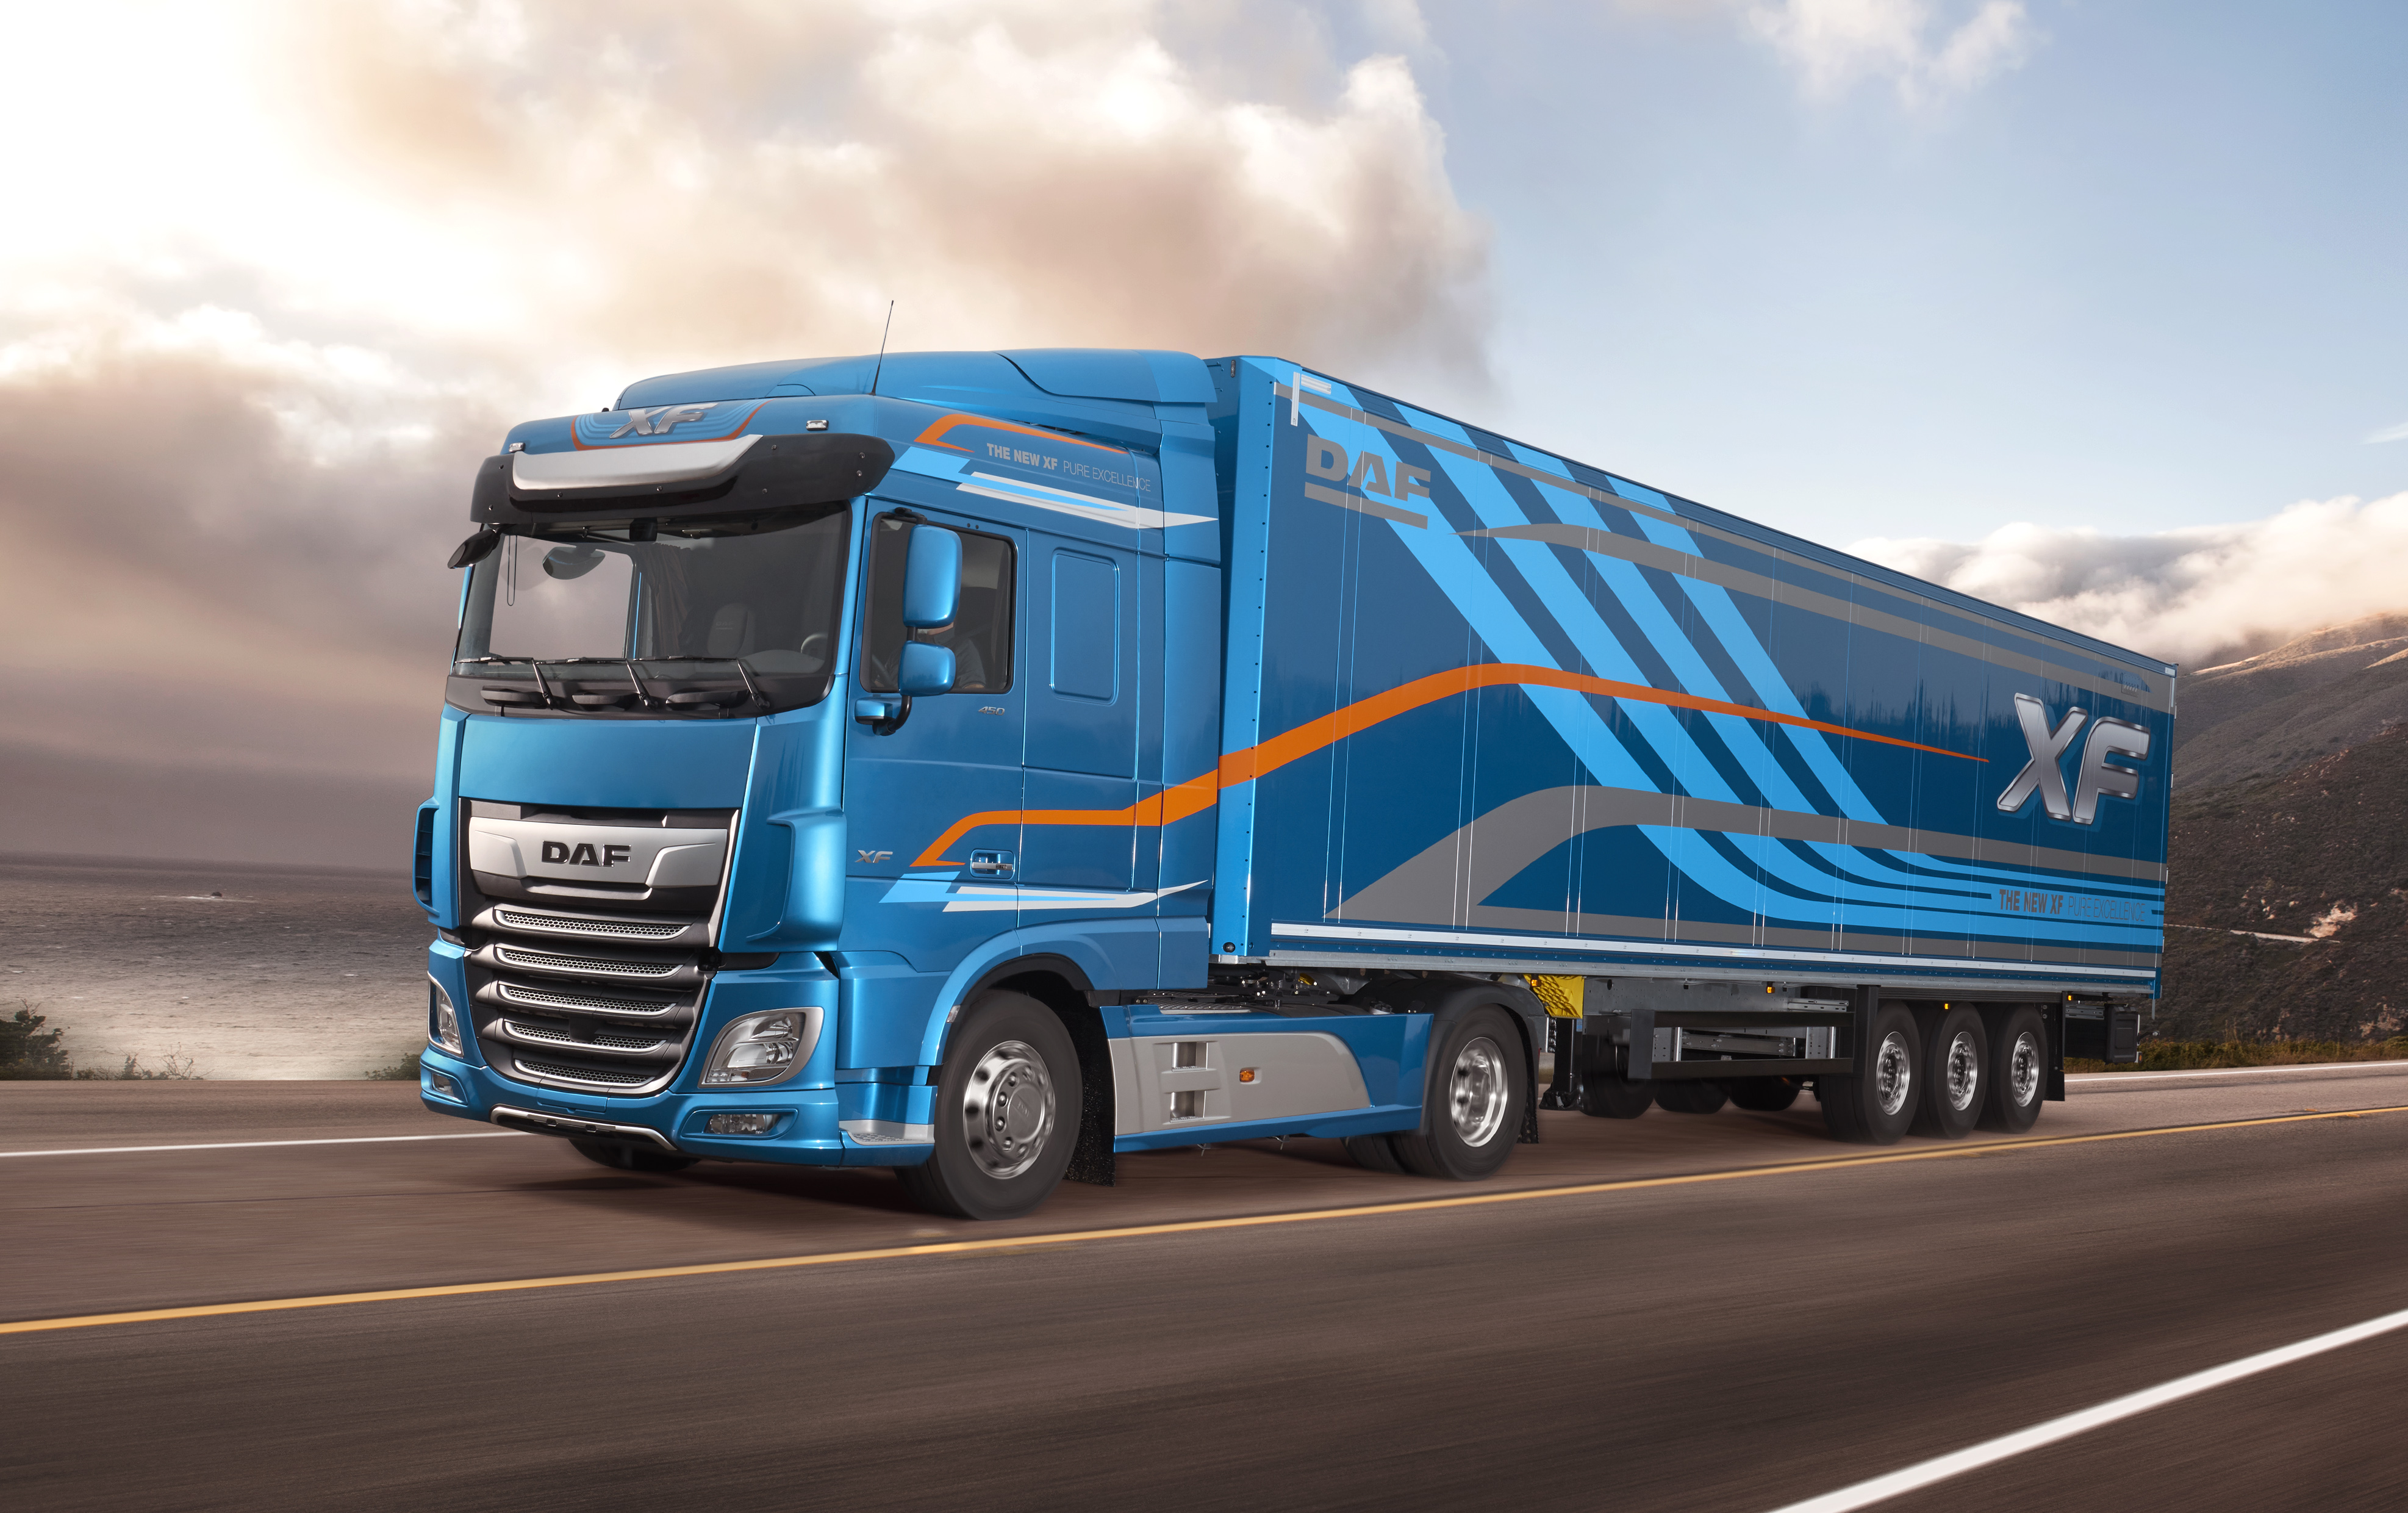 New-DAF-XF-FT-Space-Cab-2017 by casparjagerman20 on DeviantArt